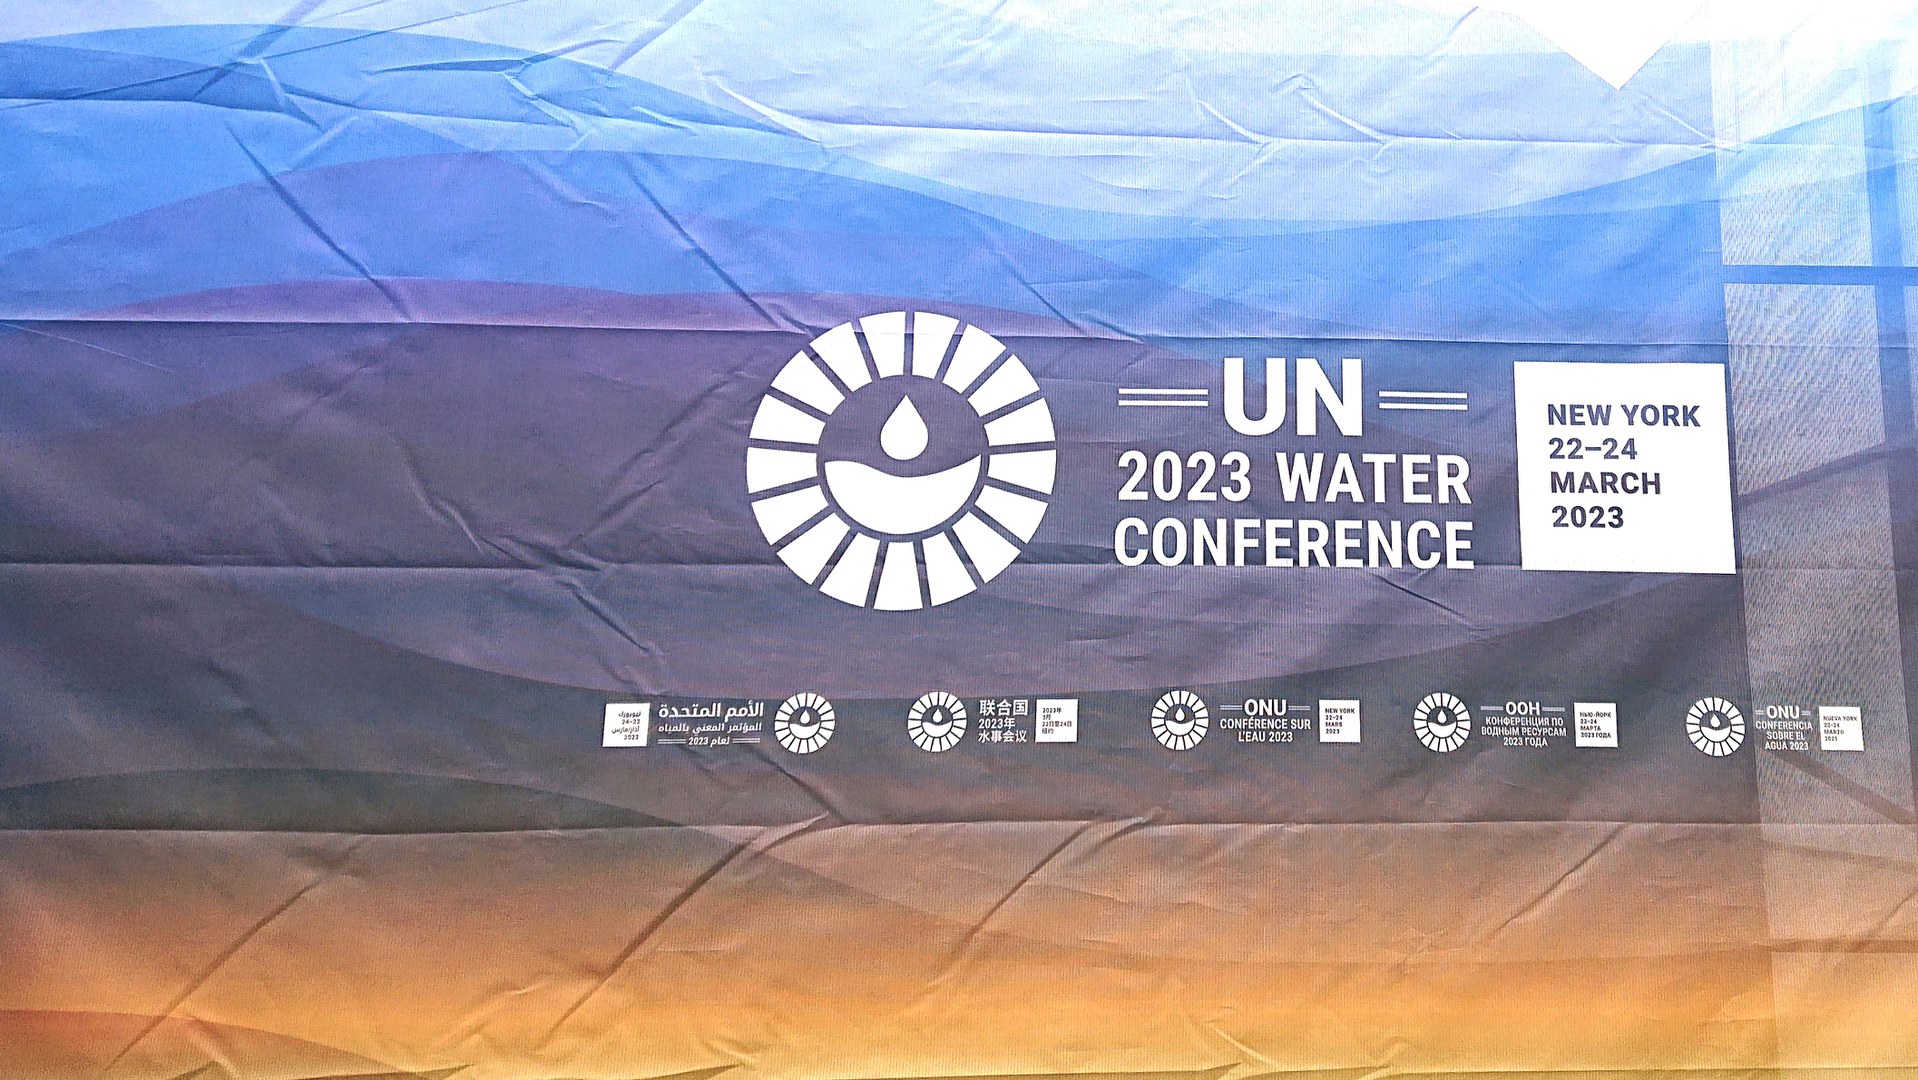 The UN Water Conference was held at the United Nations headquarters in New York between March 22 and 24.